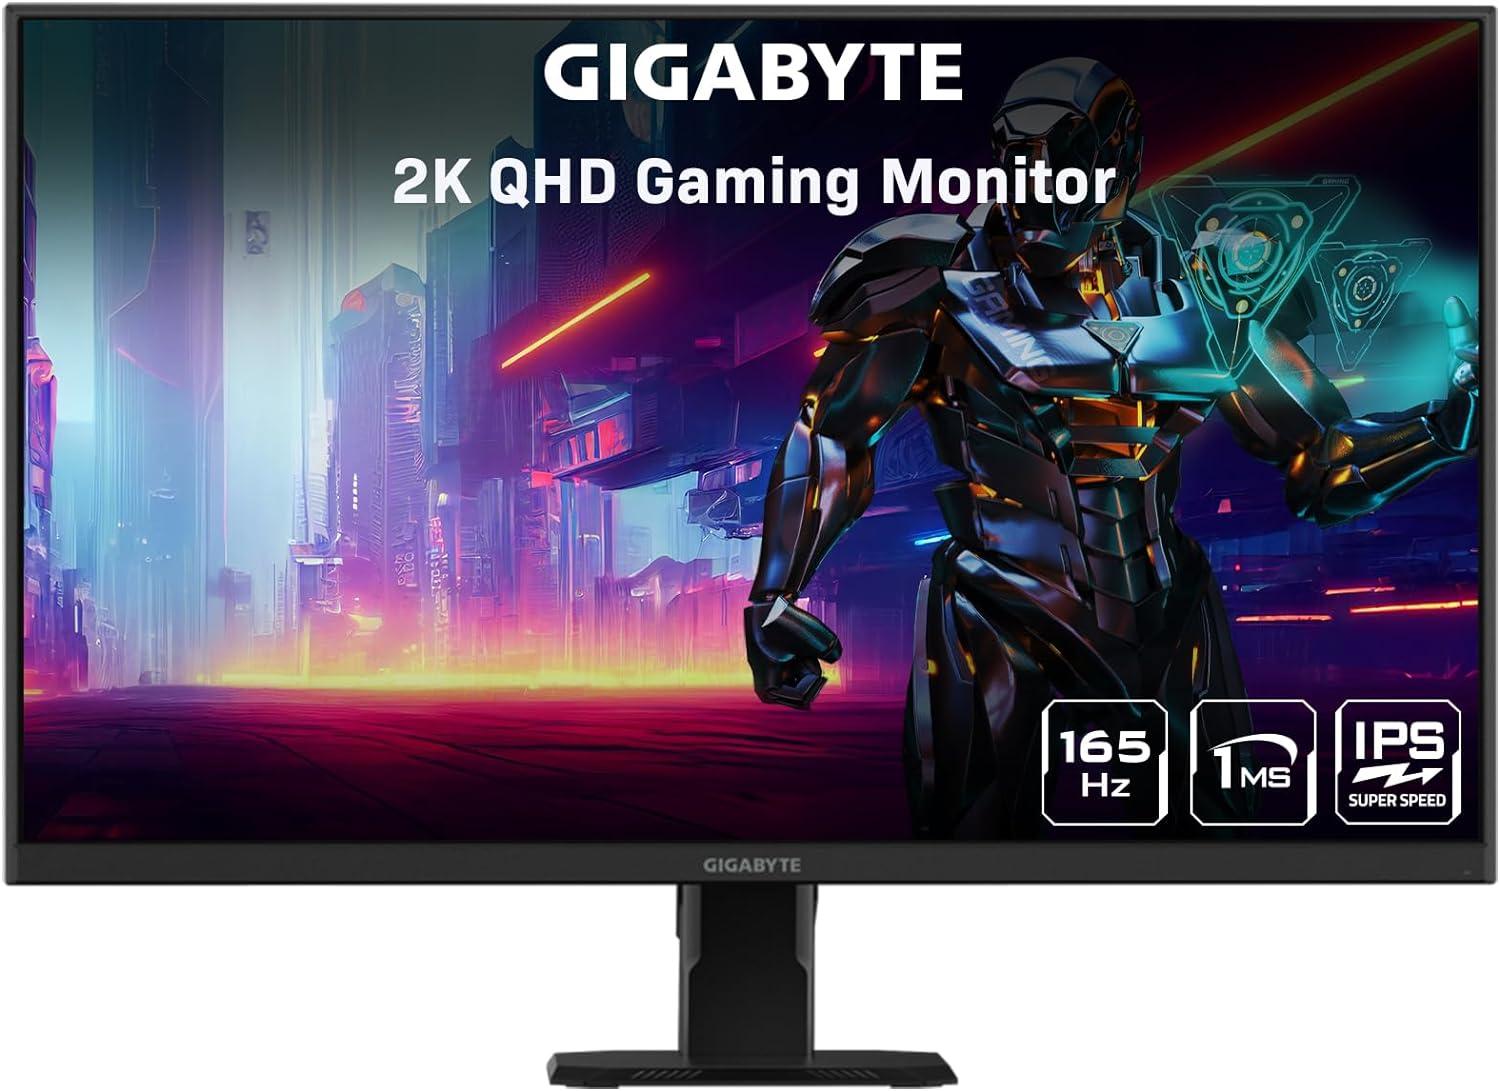 27in Gigabyte GS27Q 1440P 165Hz 1ms FreeSync IPS Gaming Monitor for $169.99 Shipped